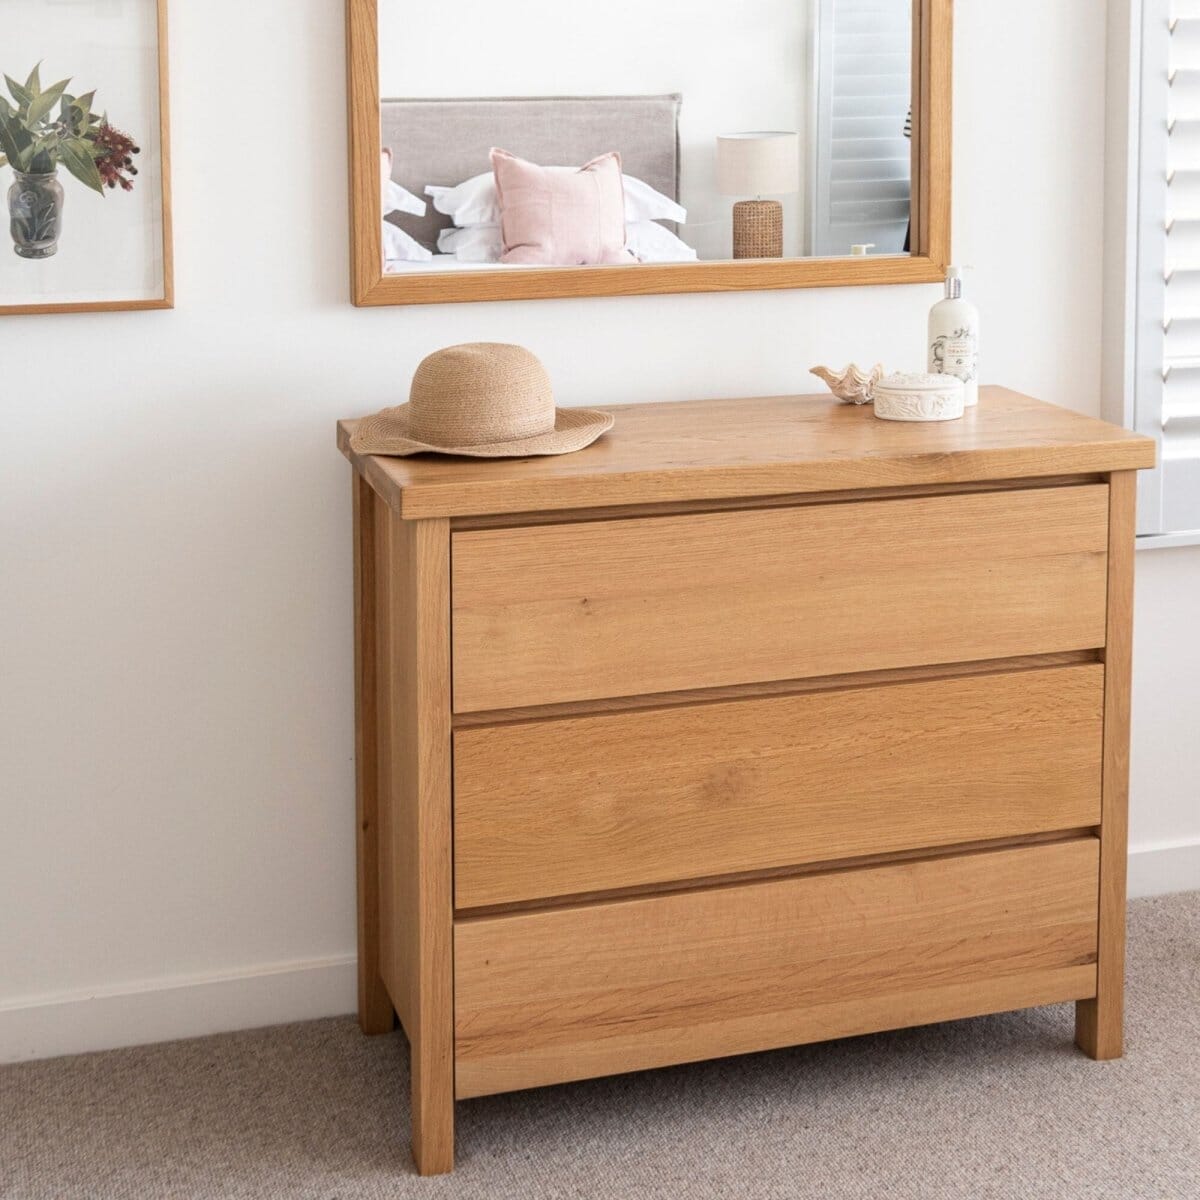 In Stock - Chest of Drawers - Beachwood Designs